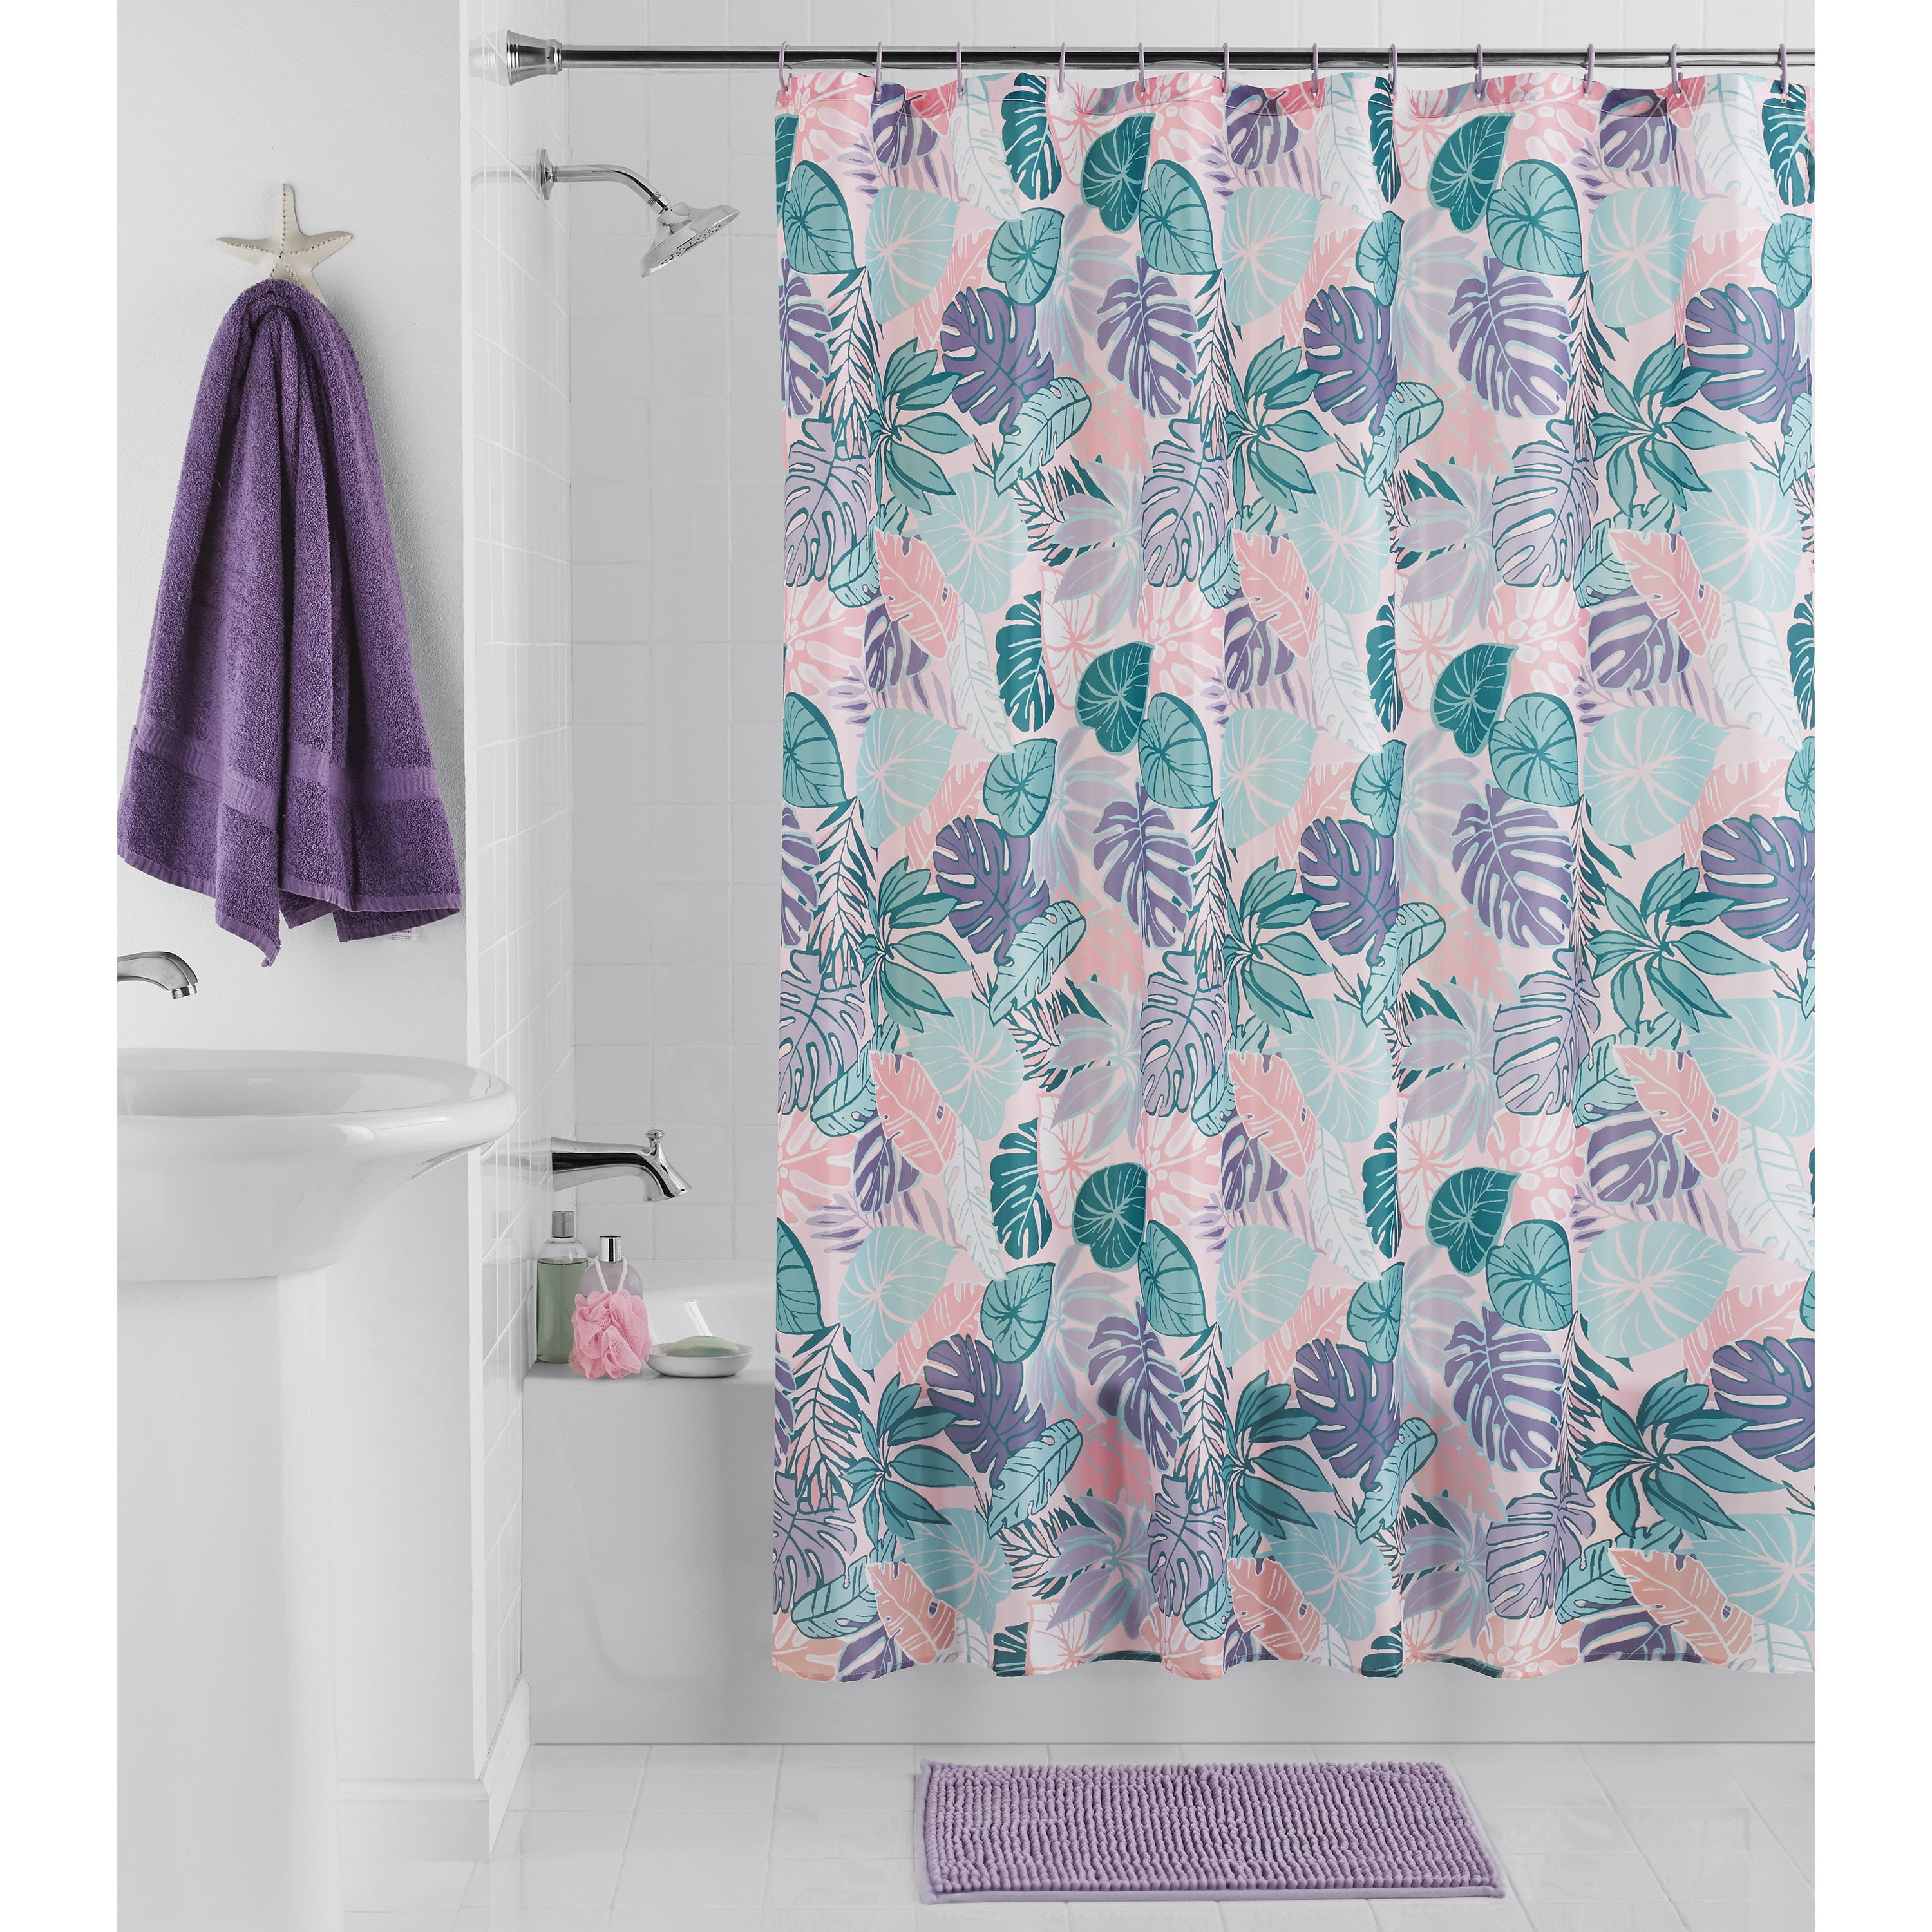 LB Watercolor Green Leaf Shower Curtain Tropical Plant Bath Curtain White Polyester Fabric Waterproof Bathroom Curtains,59x70 inch